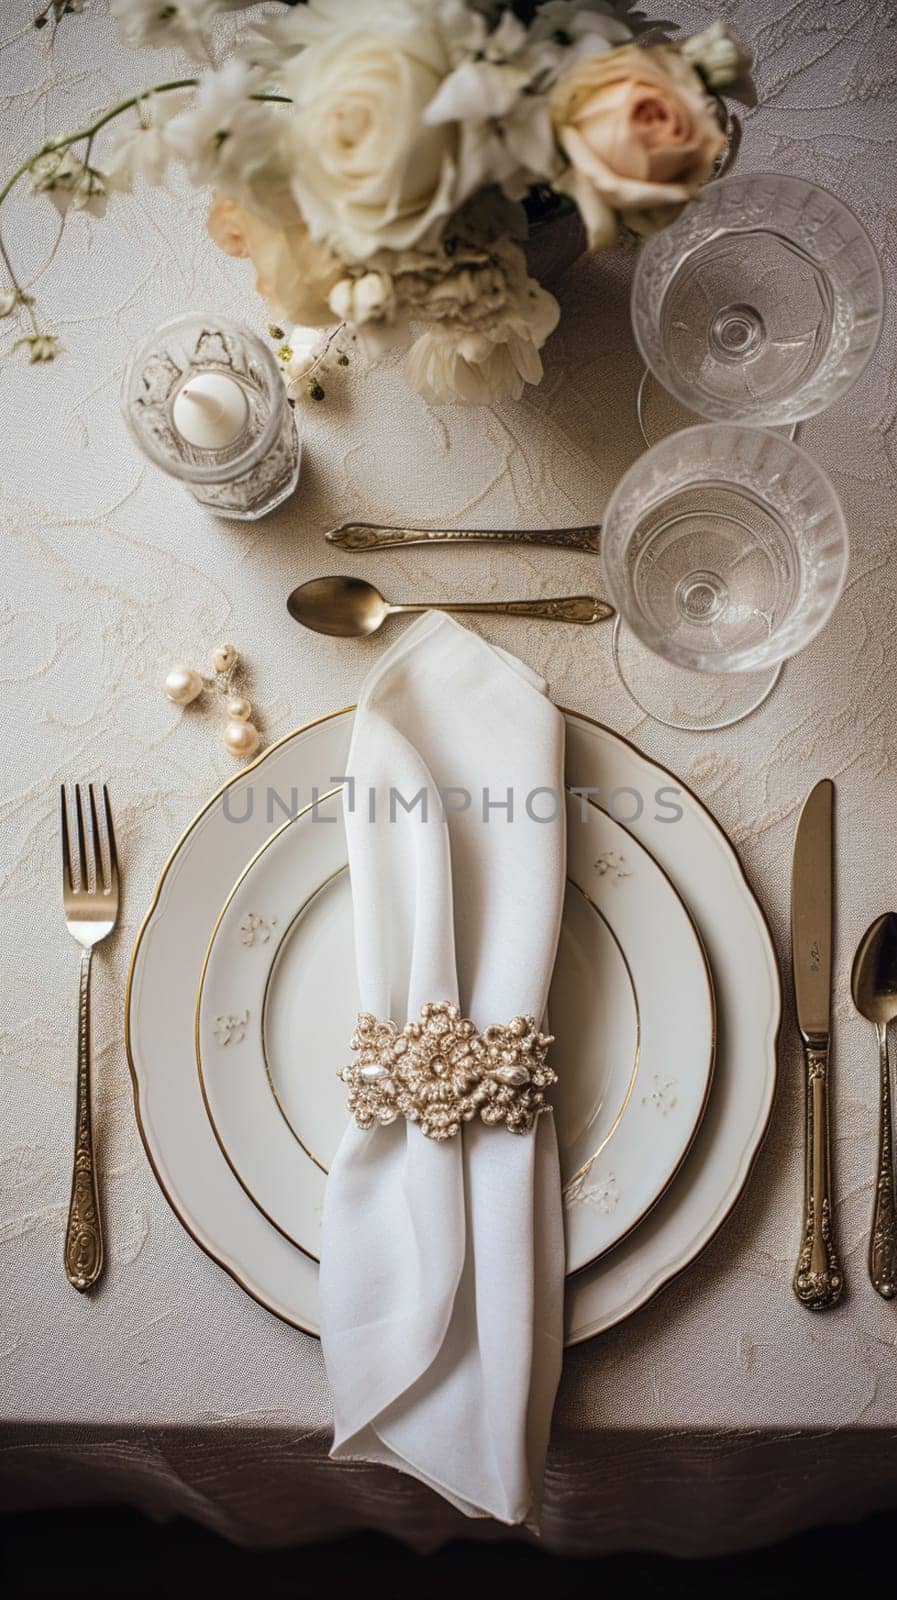 Napkin folding inspiration, holiday tablescape, formal dinner table setting, elegant decor for wedding party and event decoration by Anneleven